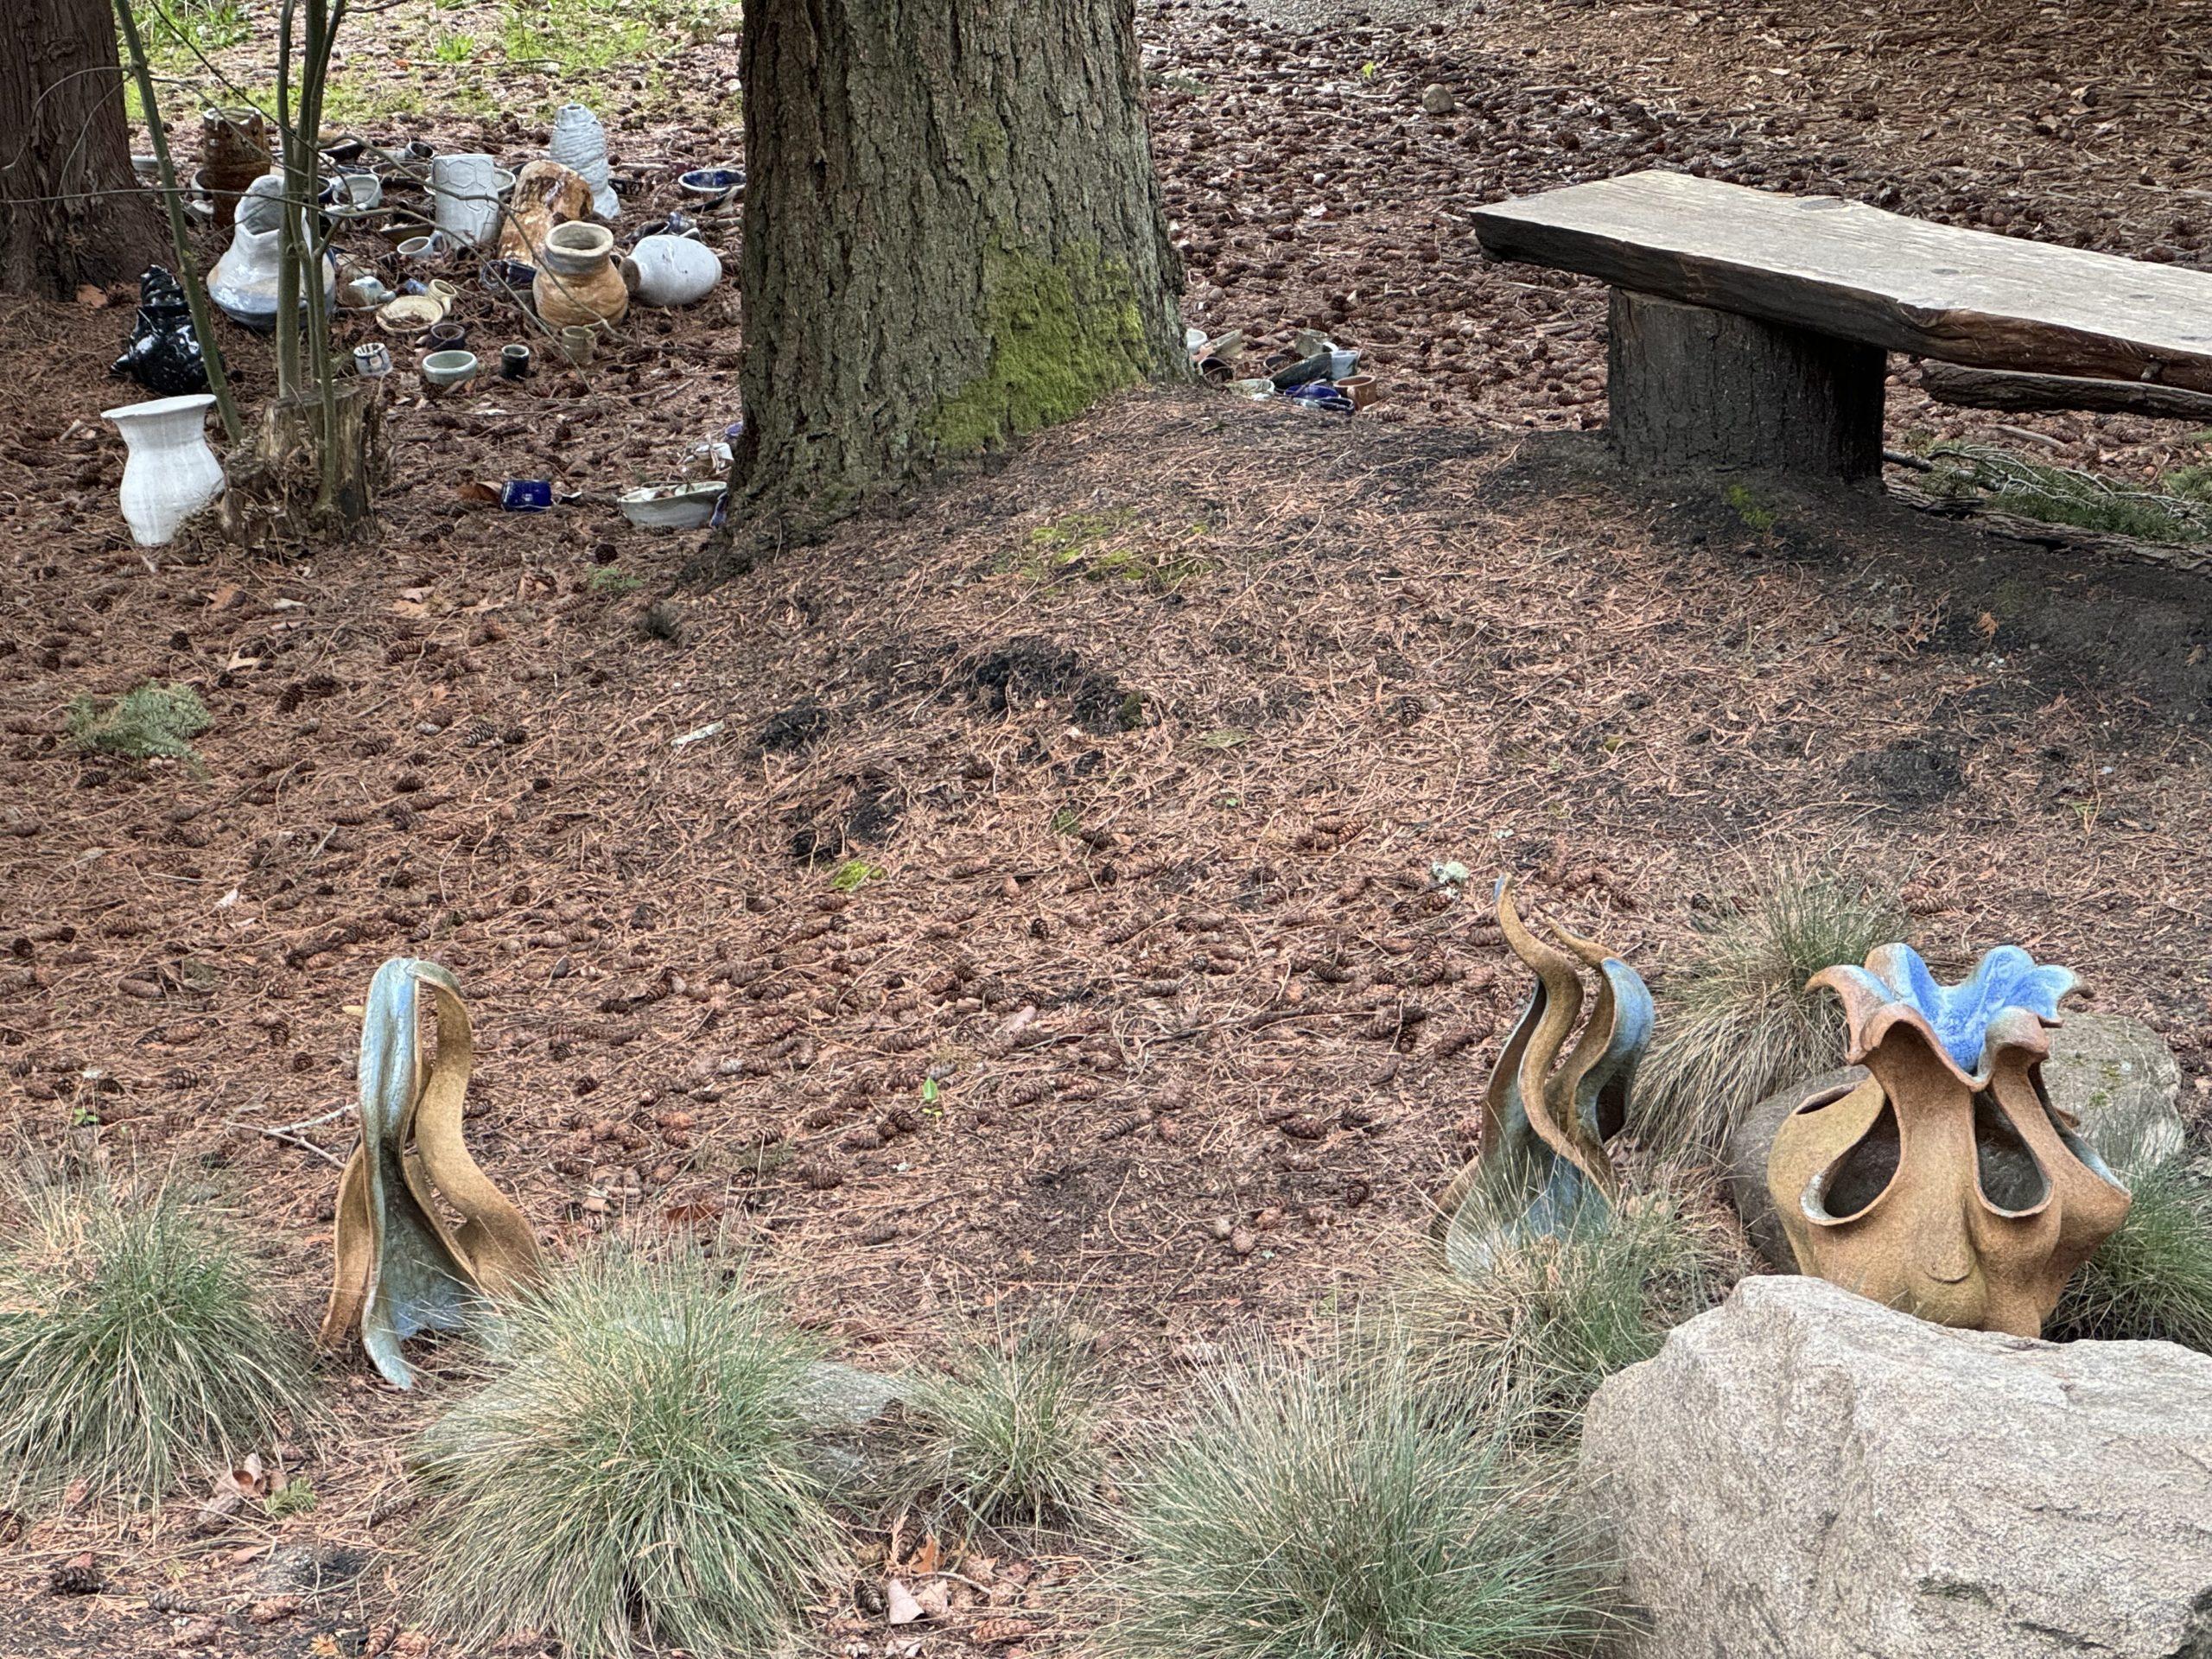 Three abstract plant-like pottery pieces in the foreground, with a grouping of vases visible near the base of a tree in the background.